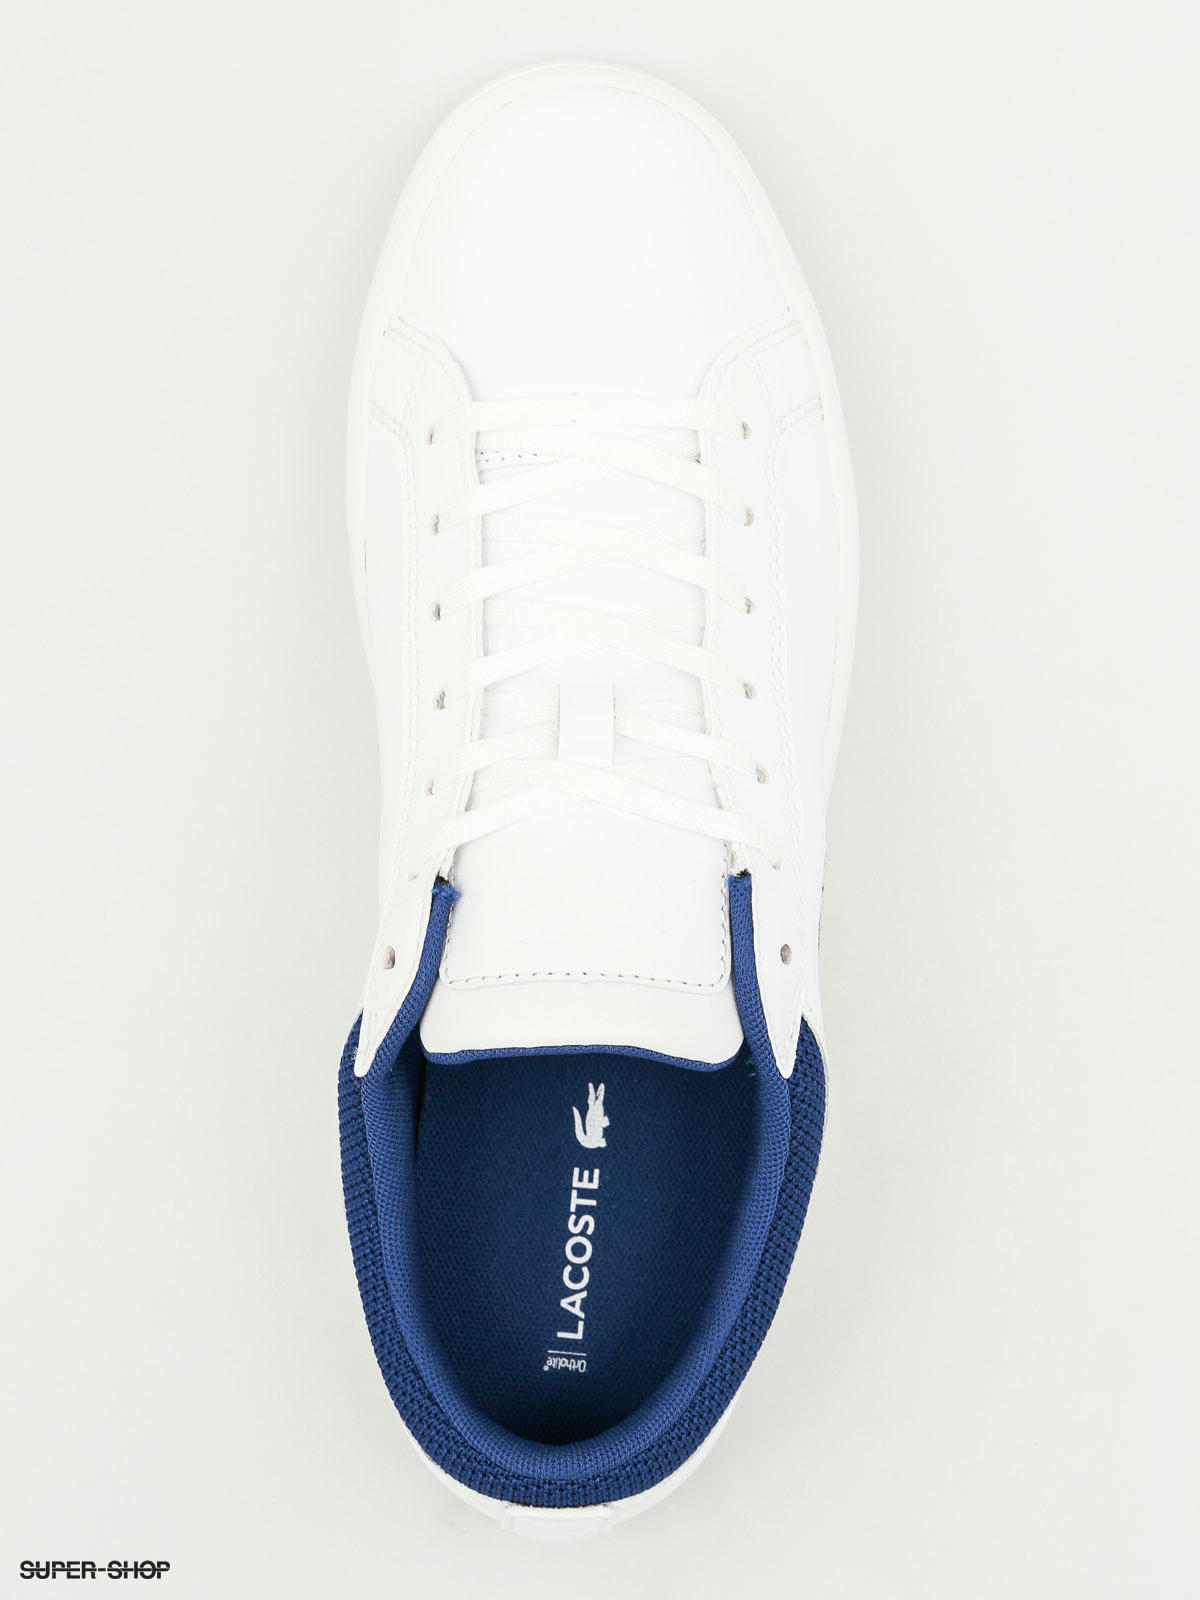 Ligegyldighed Fundament Skru ned Lacoste Shoes Straightset Sp 117 2 (cam white/dark blue/leather/textile)